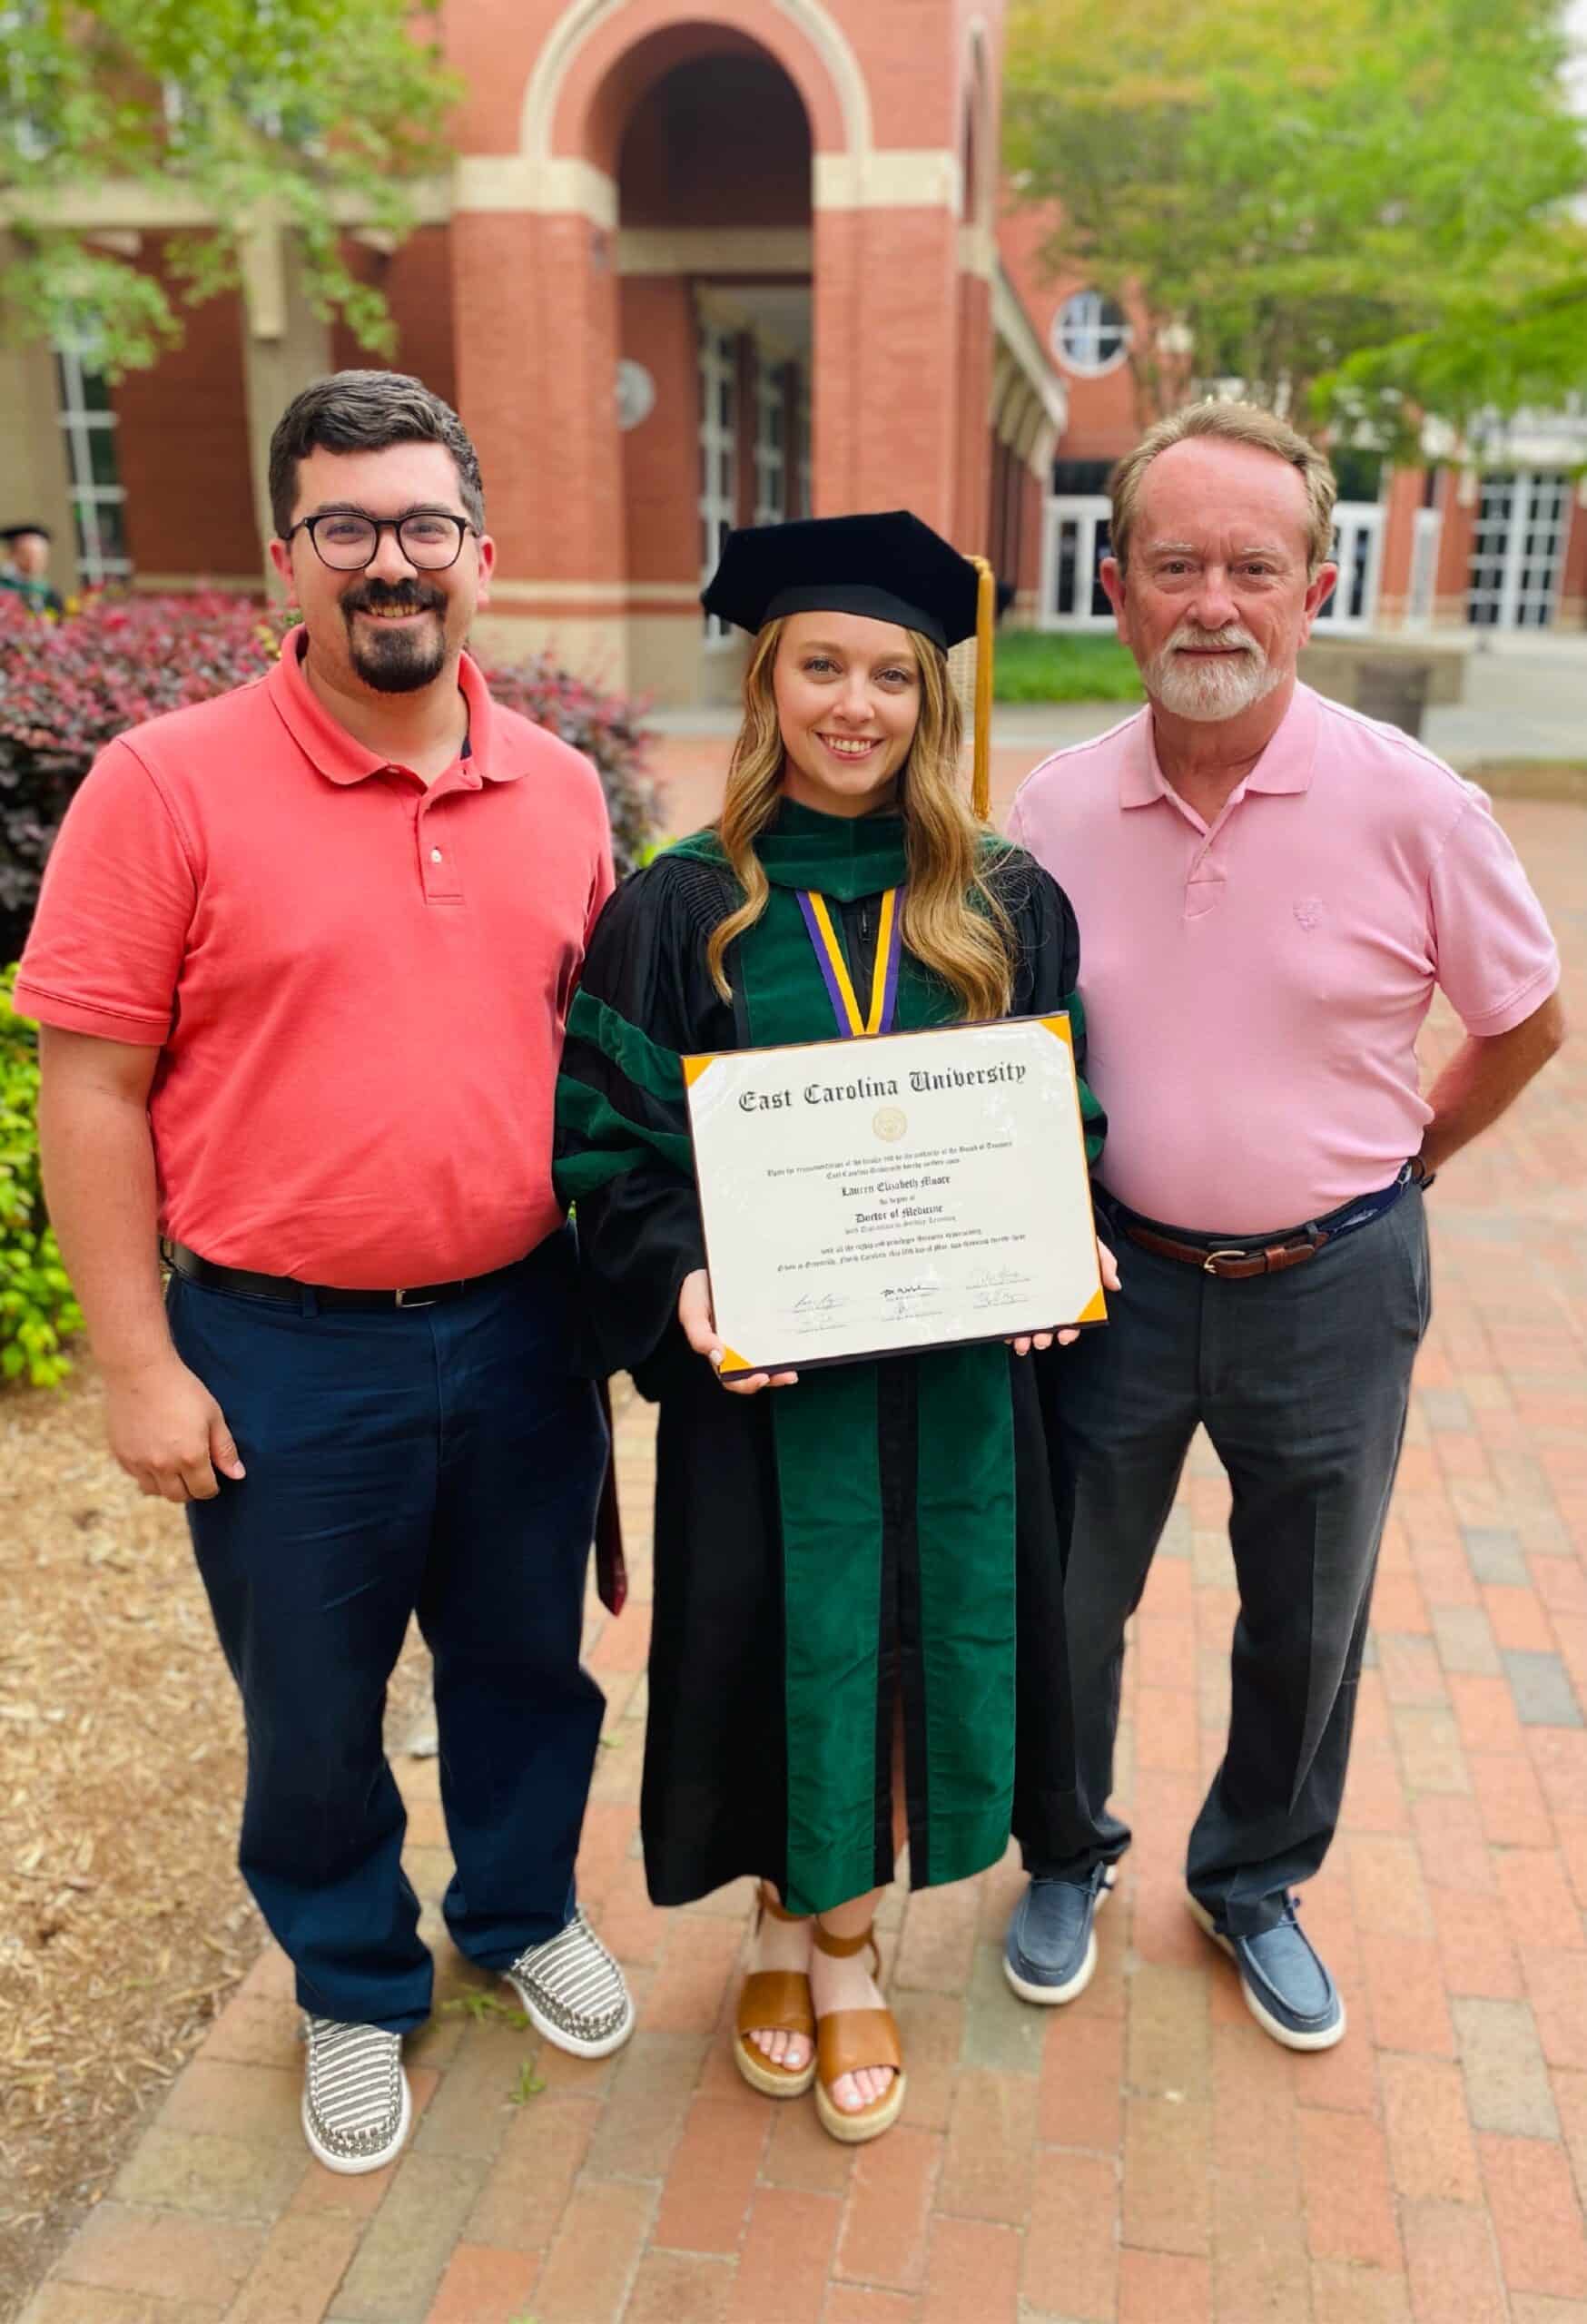 Lauren Moore poses for a photo with her family following her graduation ceremony at the Brody School of Medicine at East Carolina University. Lauren wears her cap and gown while holding her diploma in front of her.